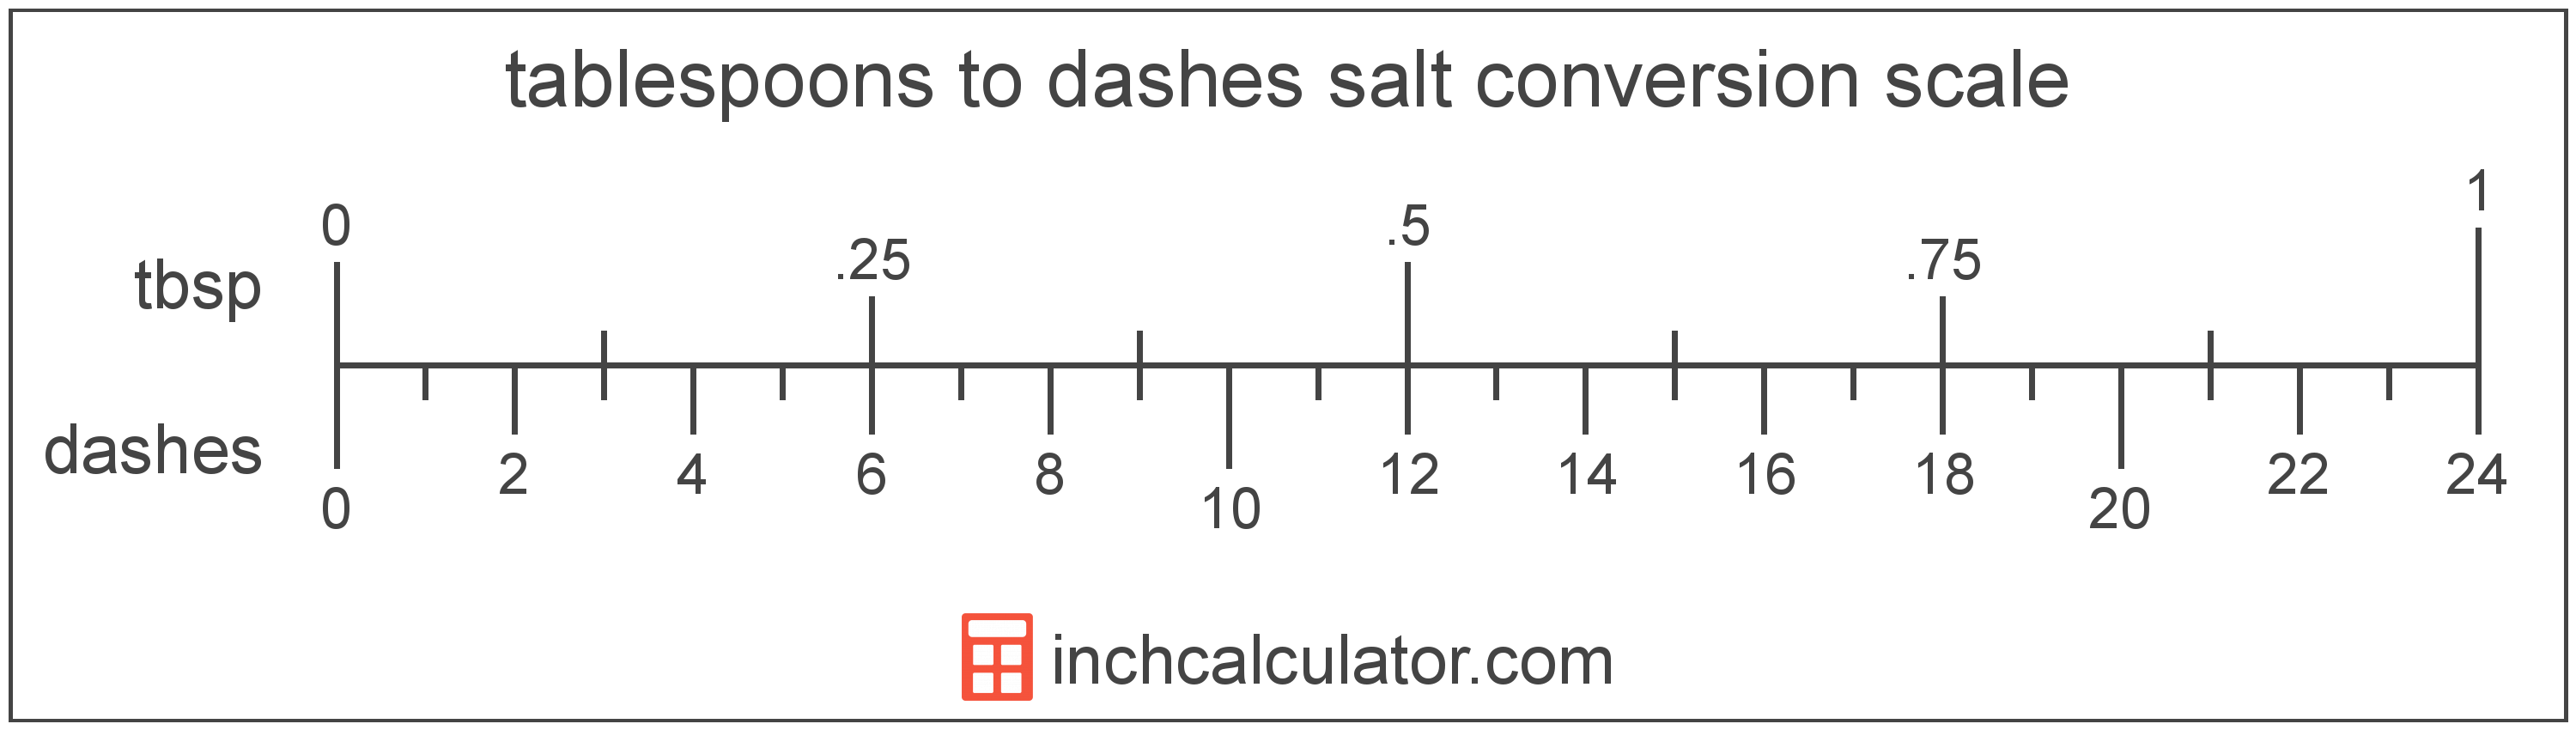 conversion scale showing tablespoons and equivalent dashes salt volume values